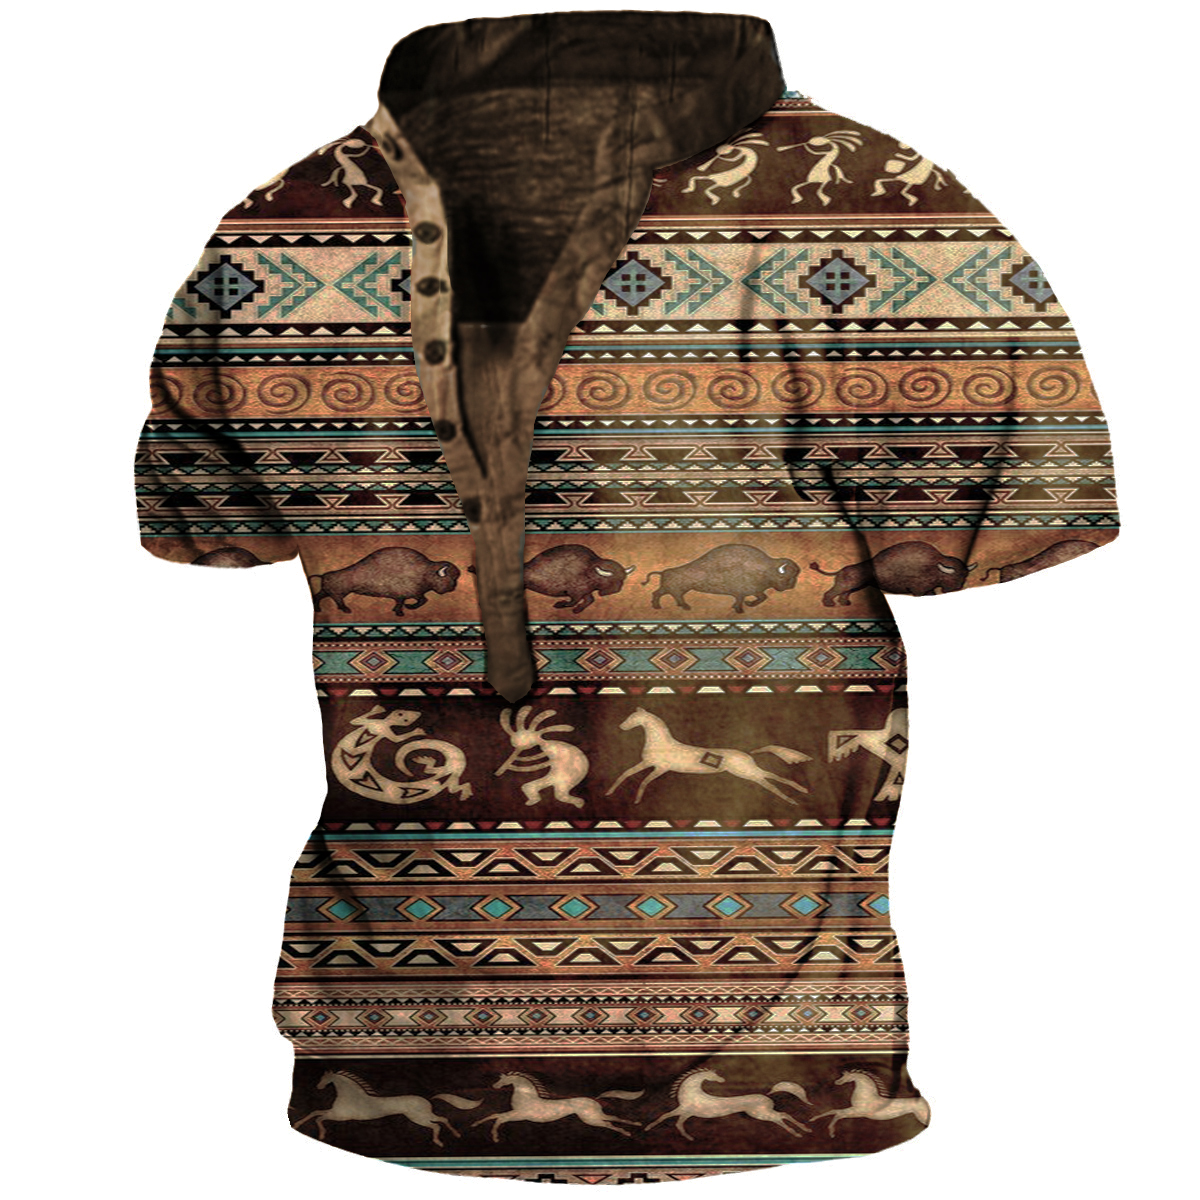 Men's Outdoor Vintage Western Chic Style Print Henry Shirt